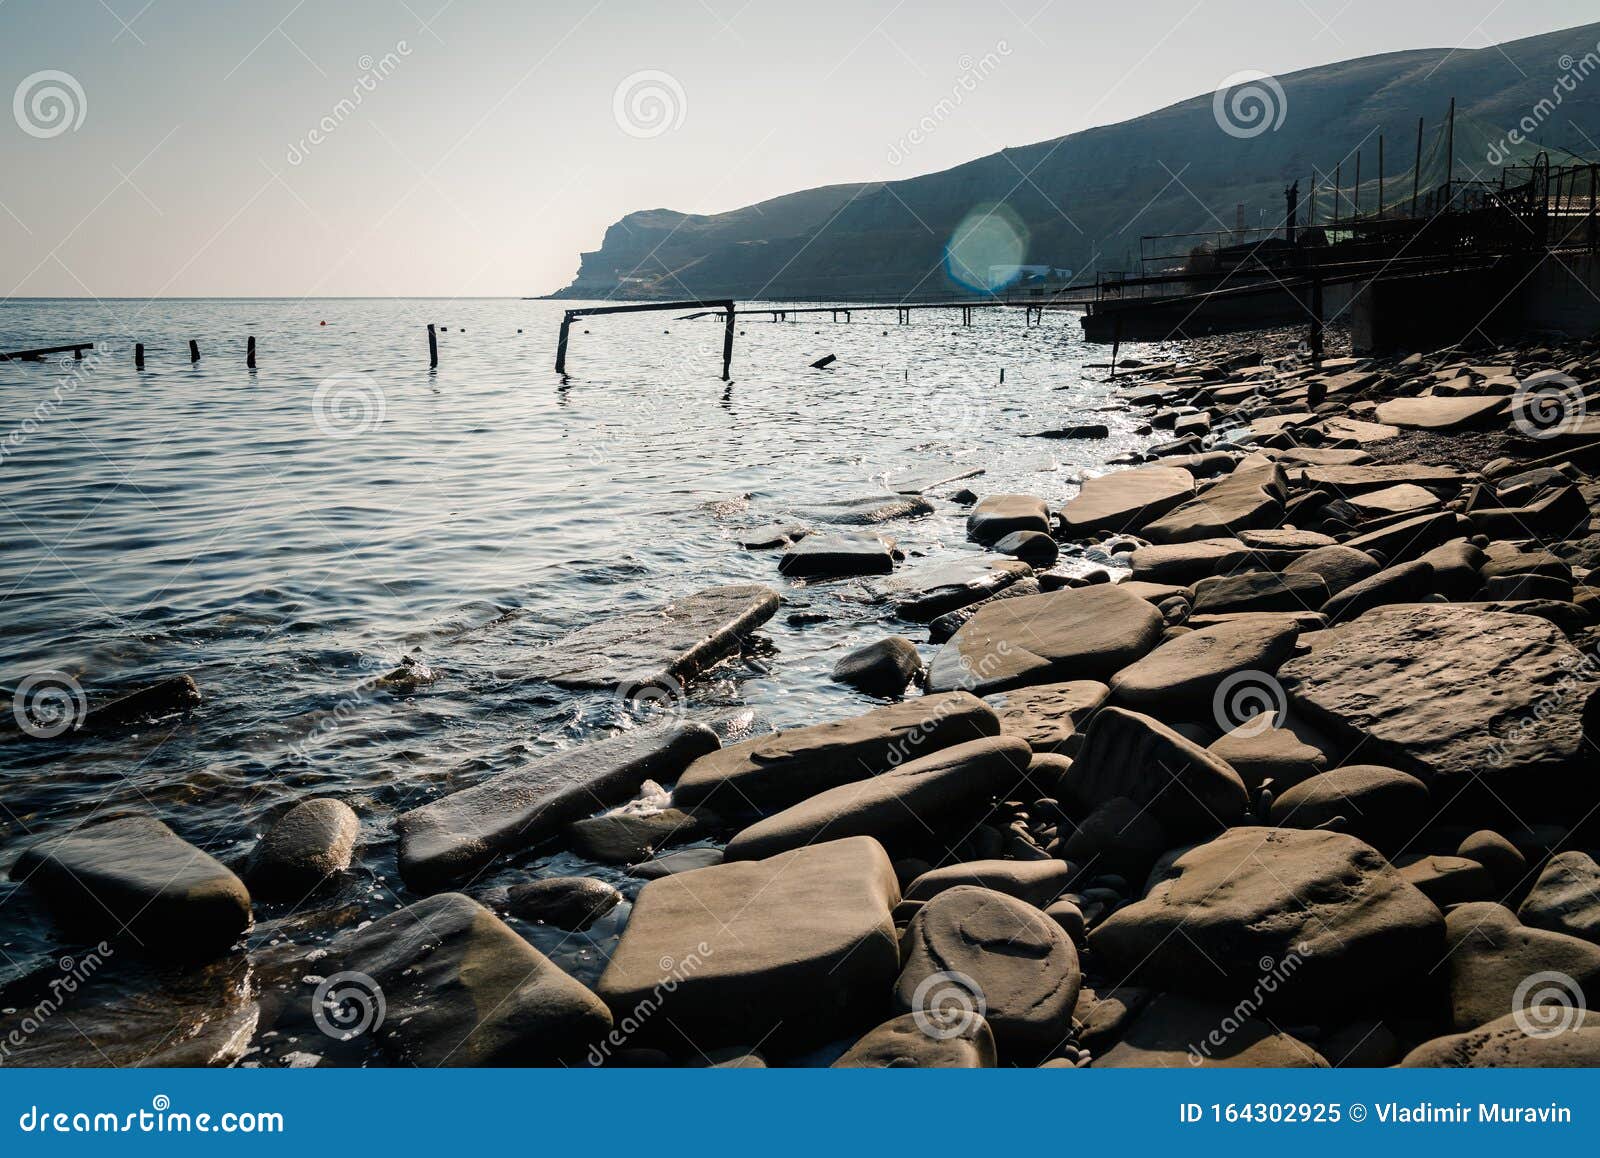 Gray Rocky Seashore in the Evening Stock Image - Image of material ...